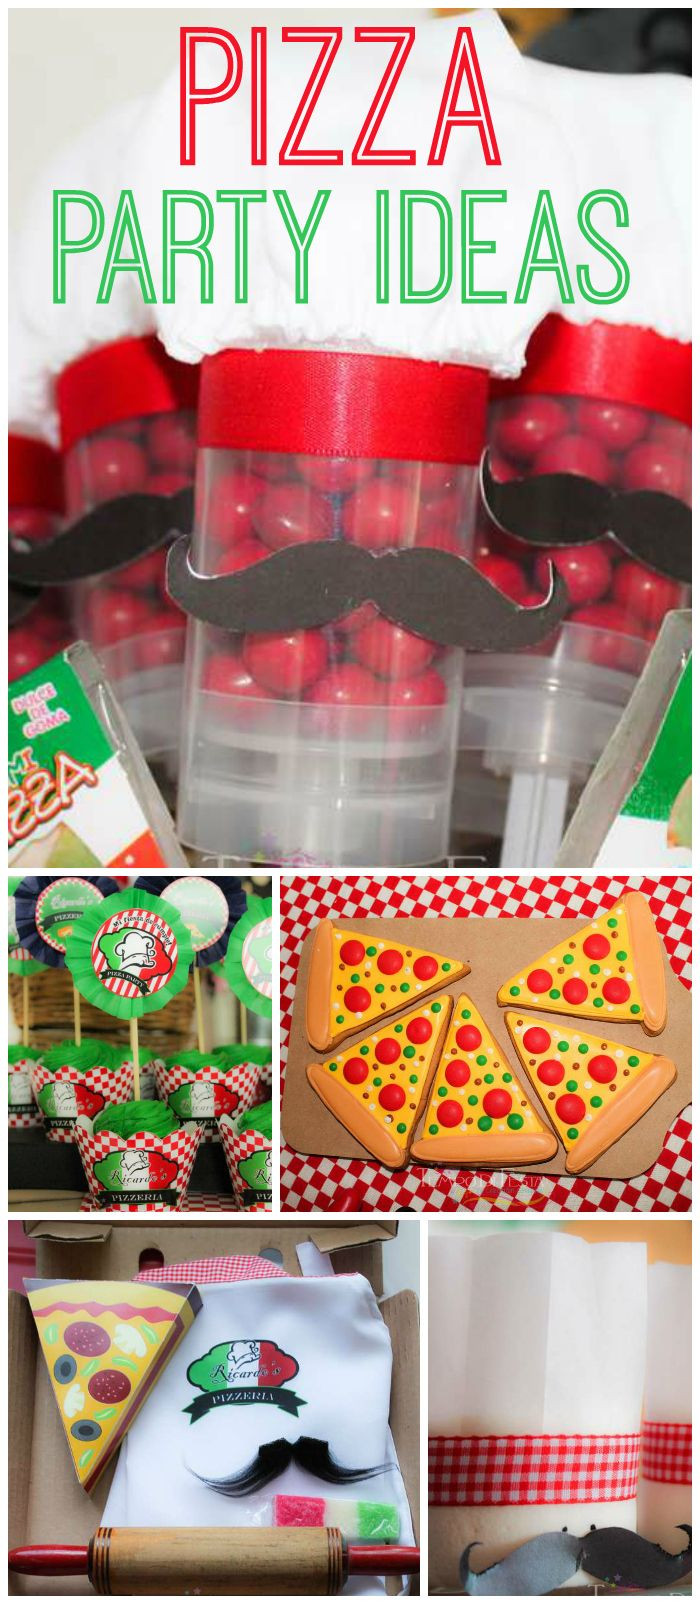 Pizza Birthday Party Ideas
 1000 images about Girls Ages 4 9 Birthday Party Ideas